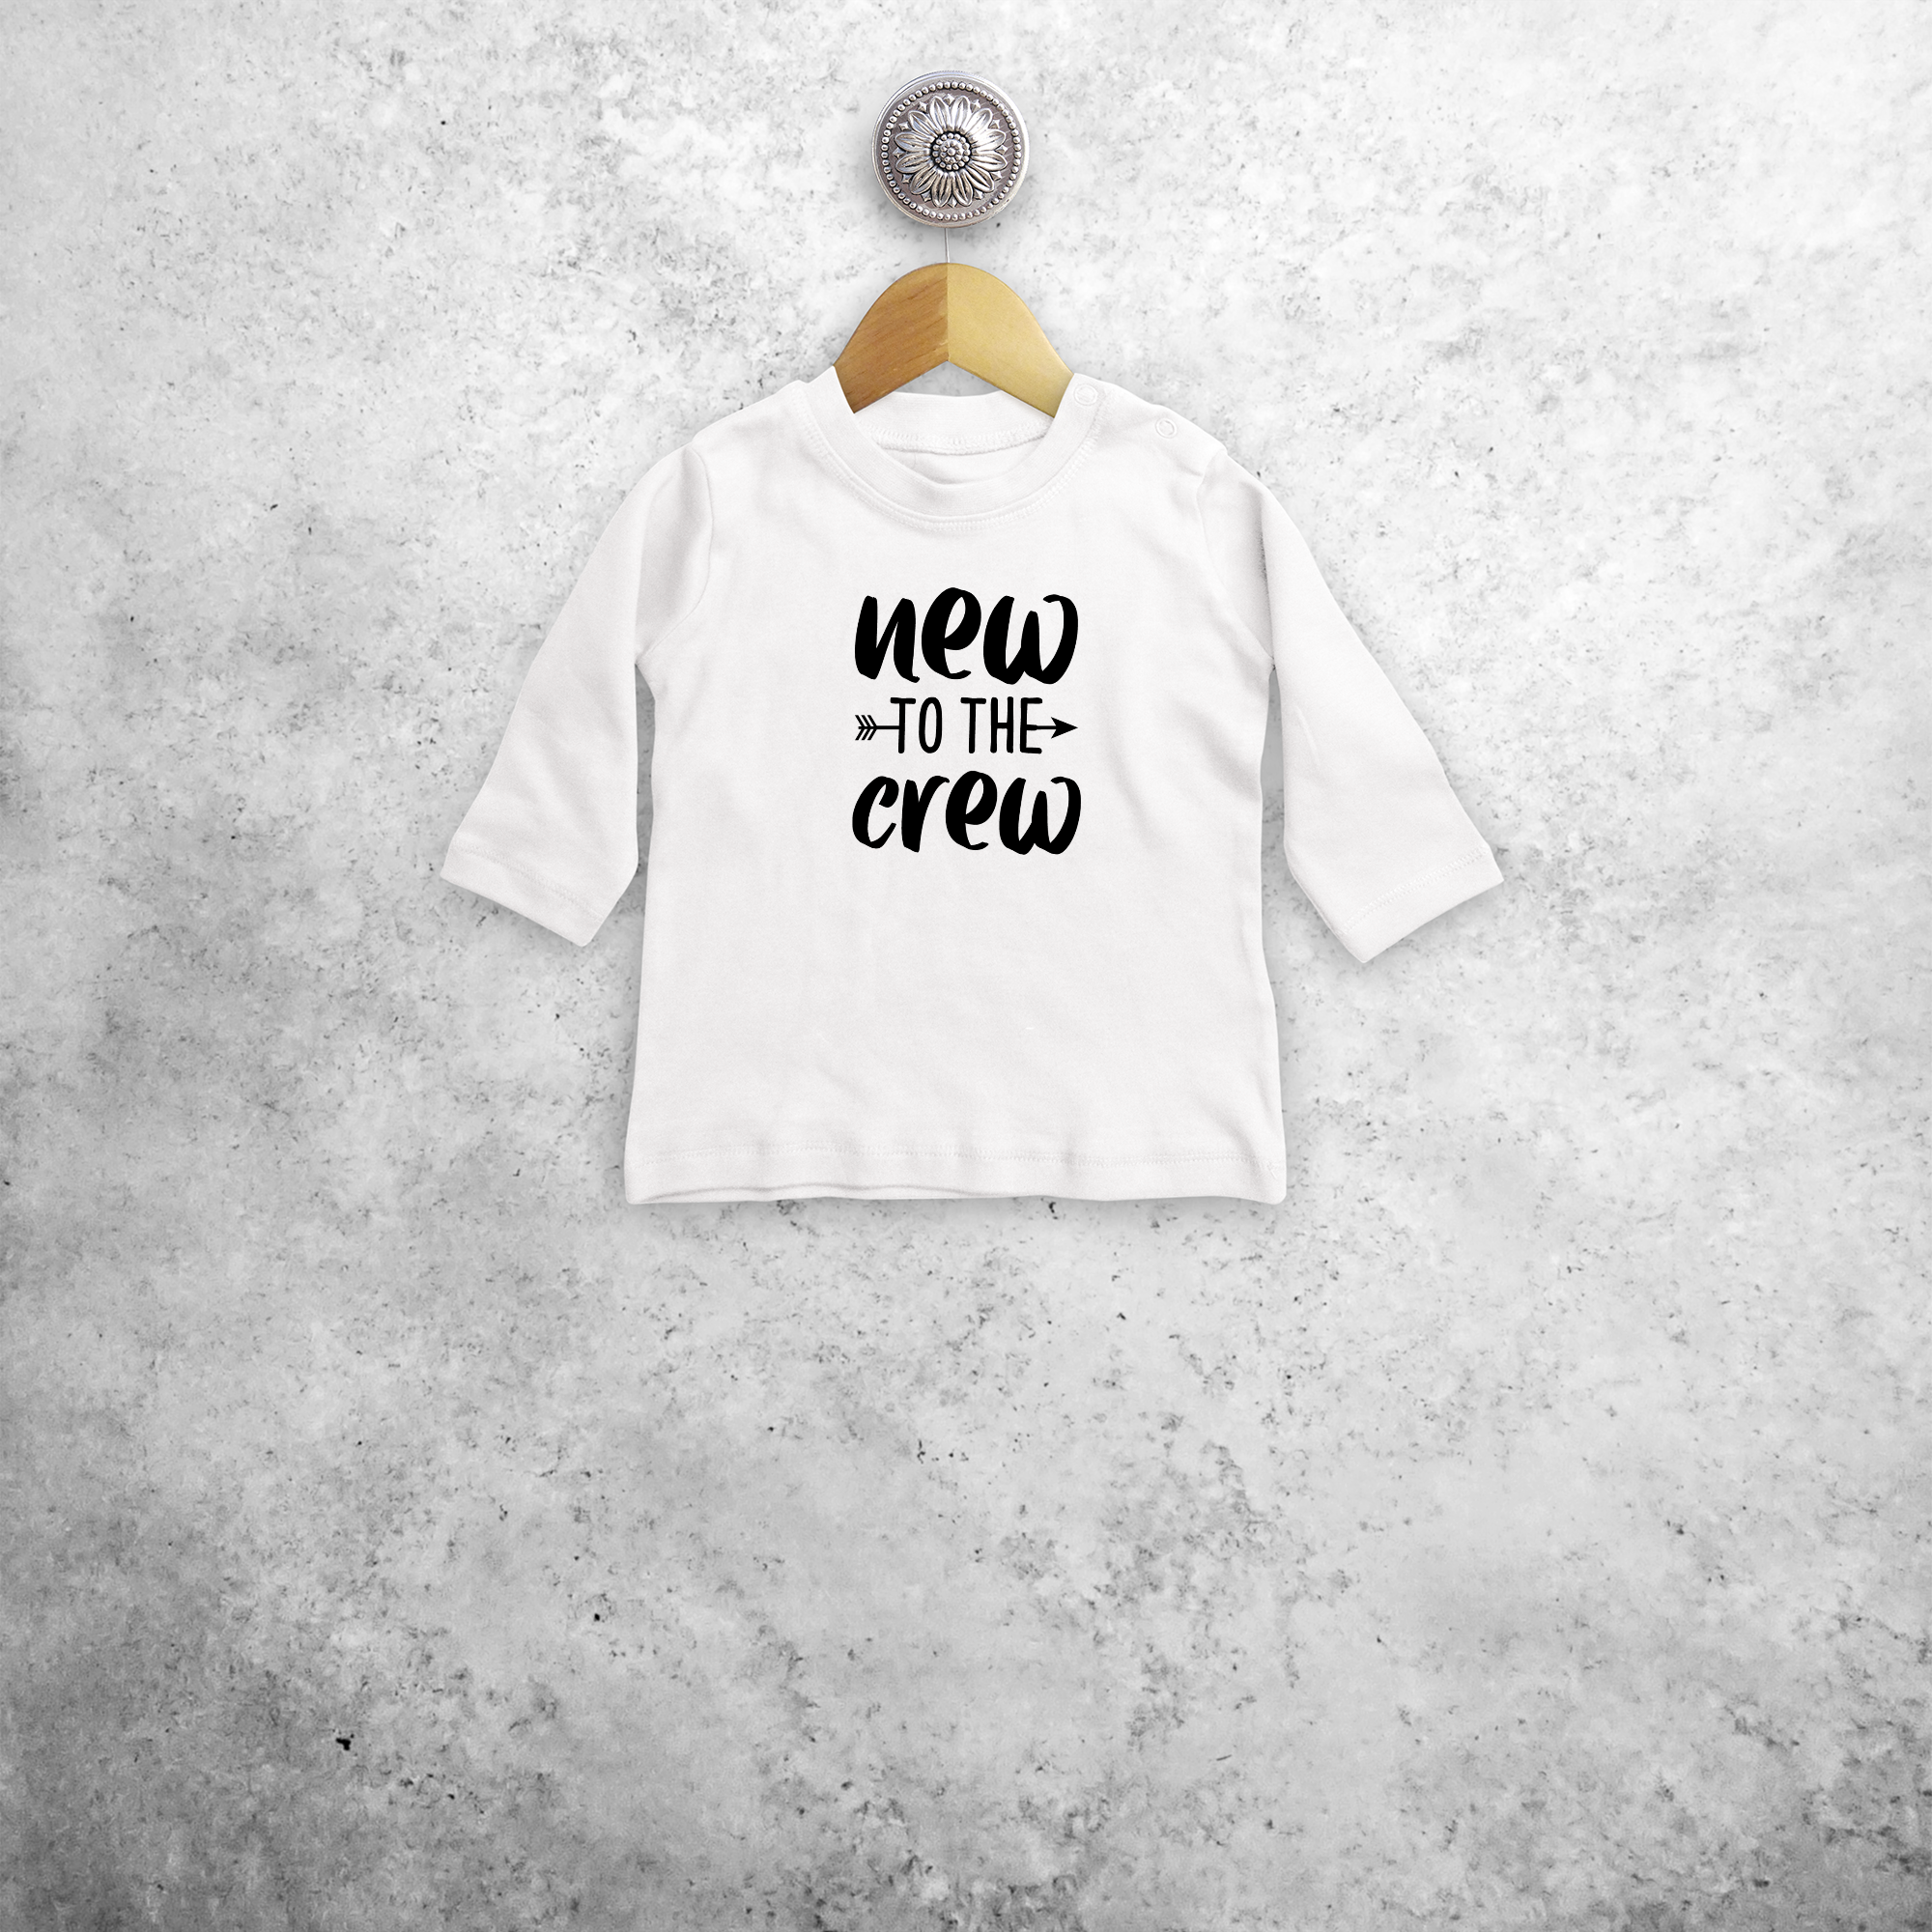 'New to the crew' baby longsleeve shirt